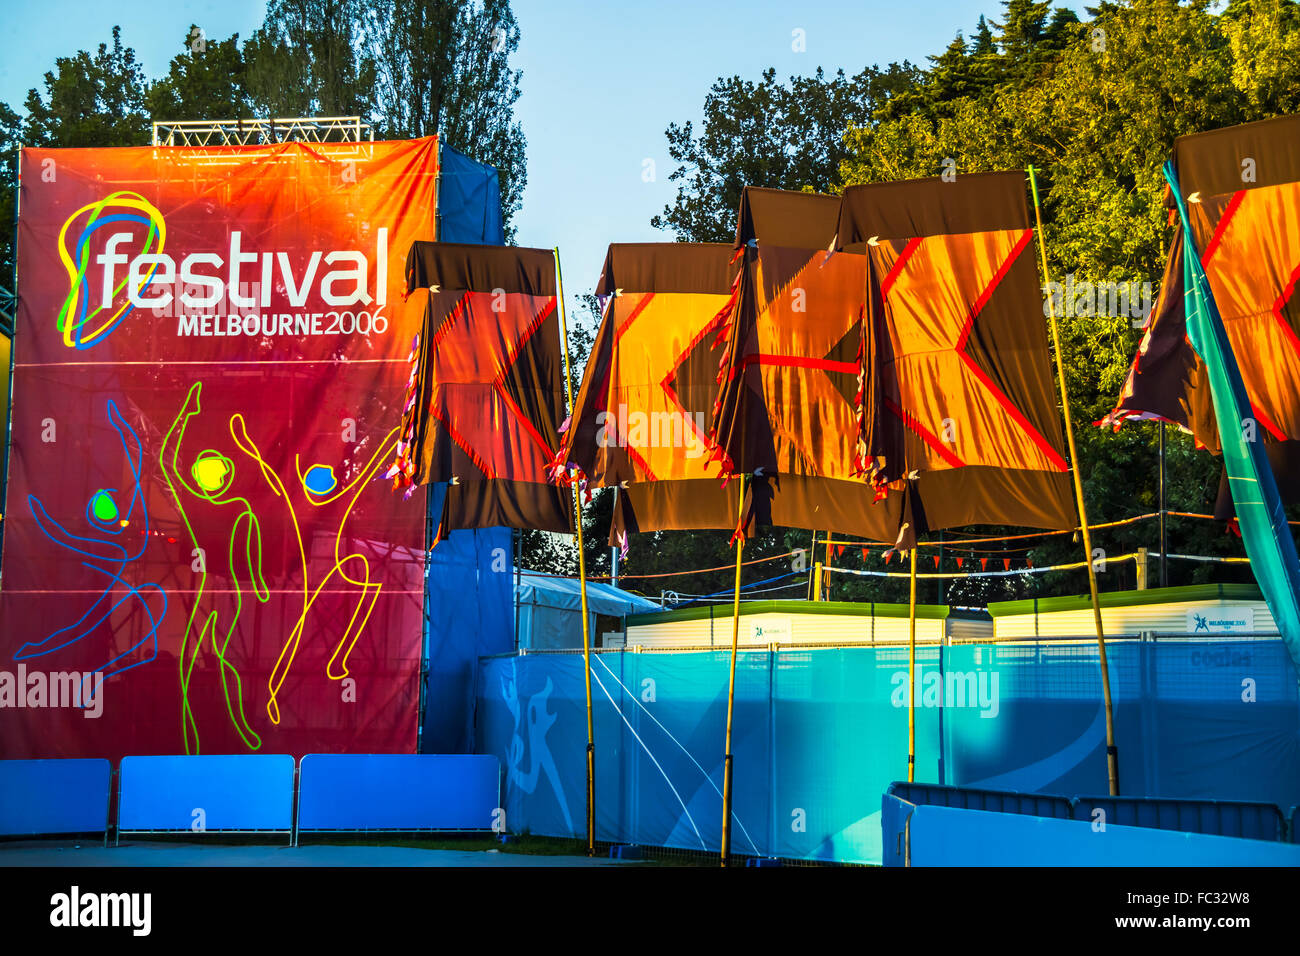 Colourful flags created by artist Angus Watt waving in the wind at Melbourne Festival, Australia Stock Photo